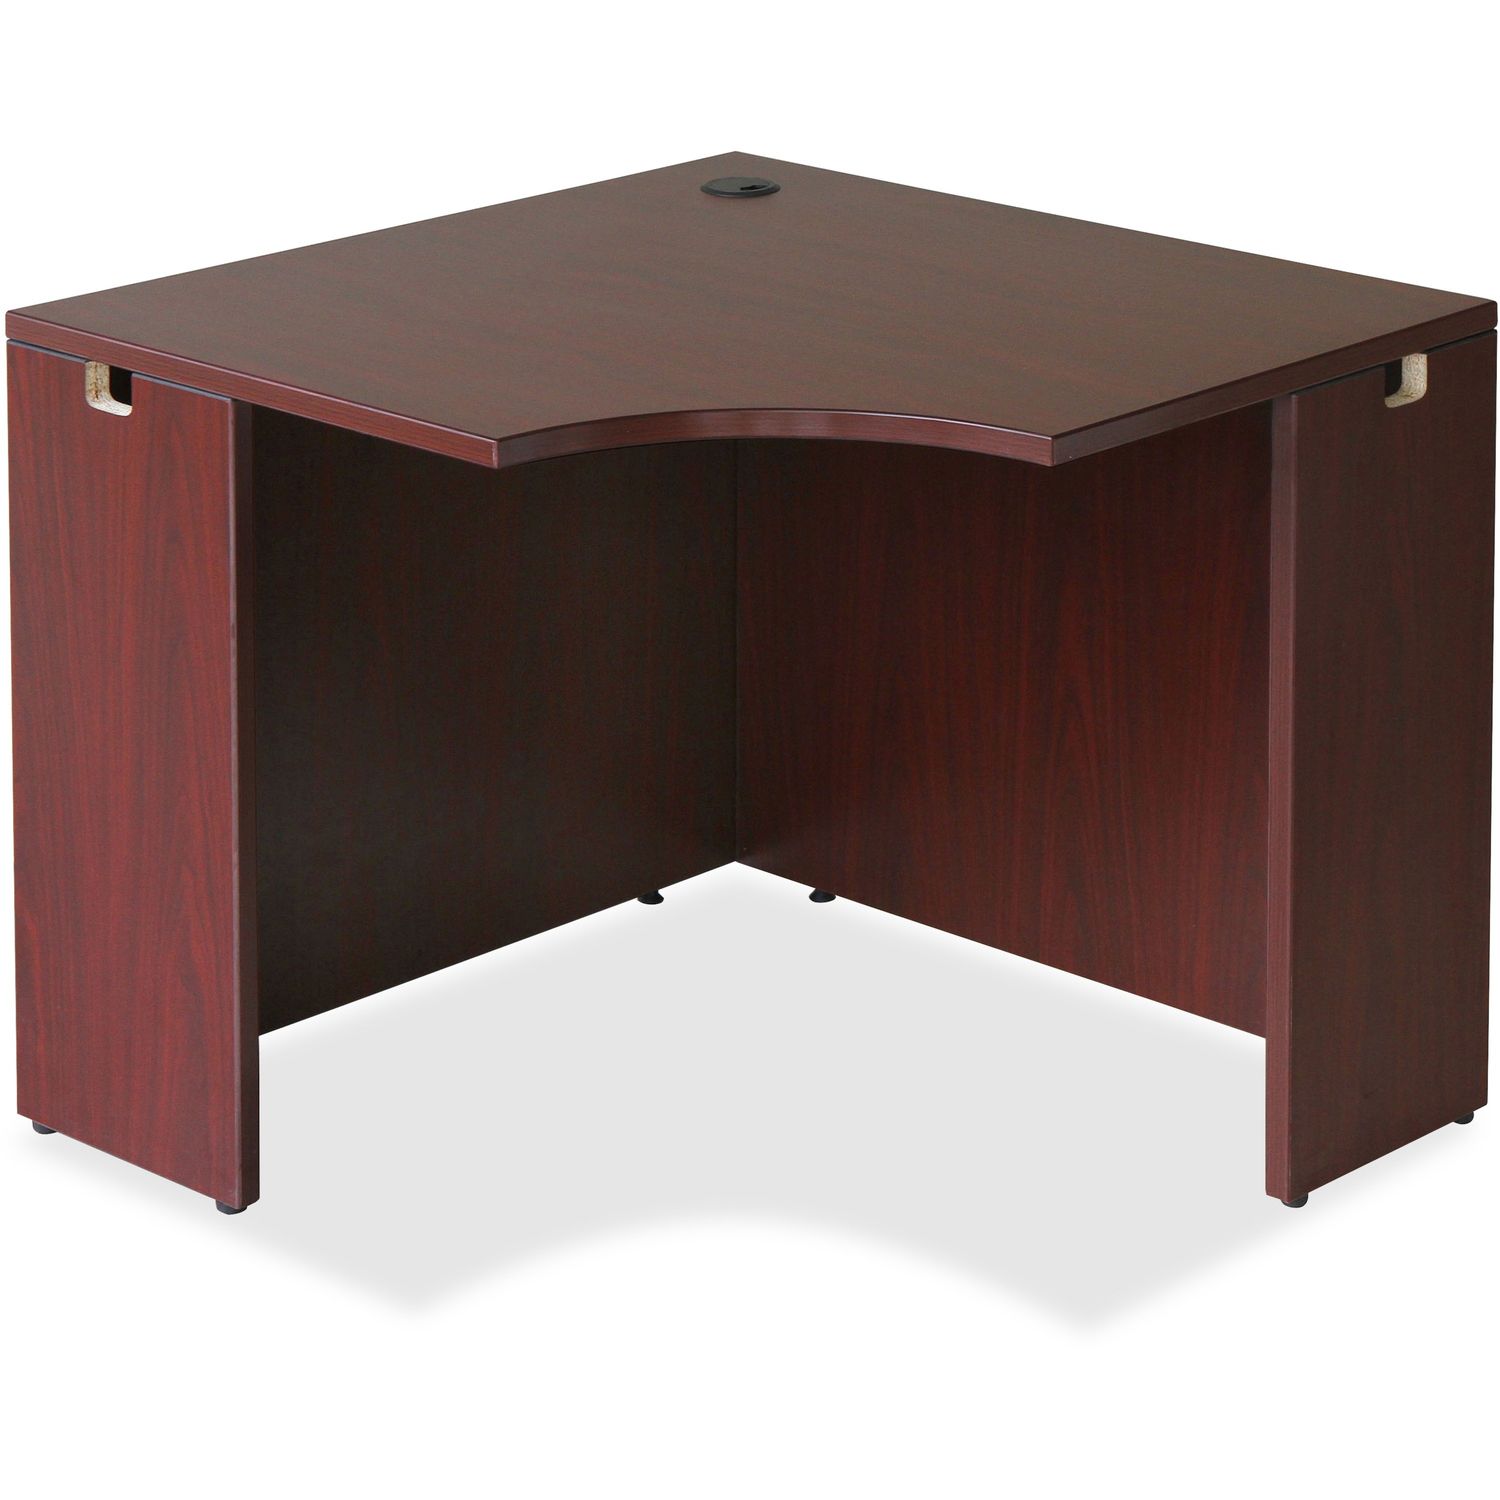 Essentials Series Mahogany Corner Desk Laminated Rectangle, Mahogany Top, 35.38" Table Top Width x 35.38" Table Top Depth x 1" Table Top Thickness, 29.50" Height, Assembly Required, Mahogany